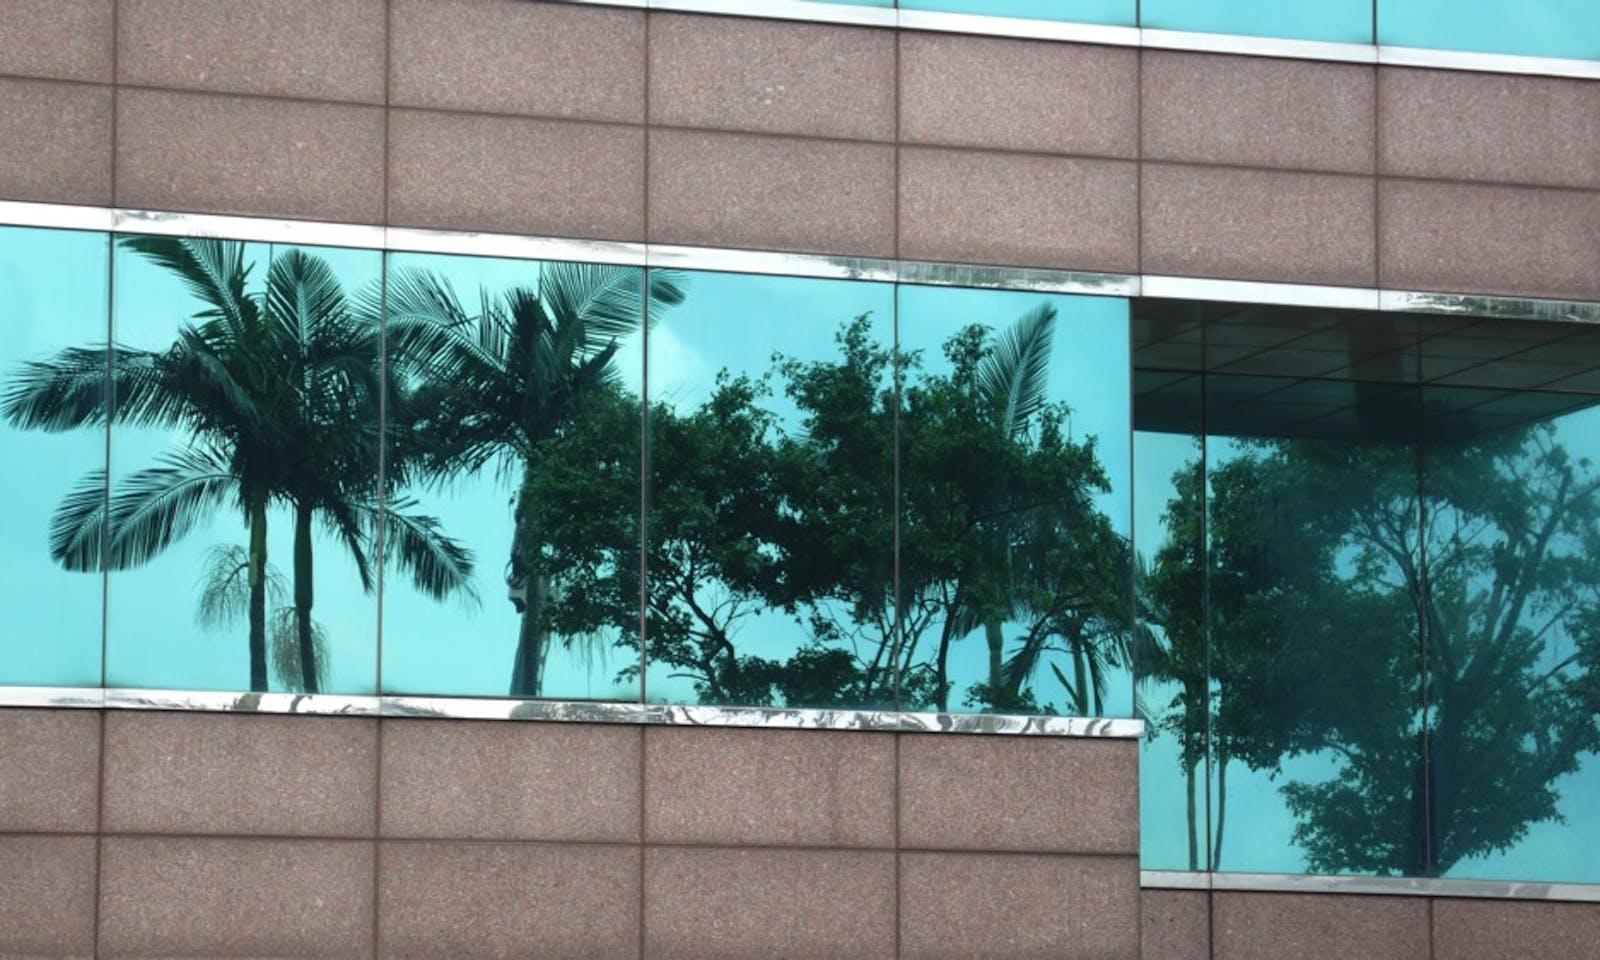 Reflecting trees office building